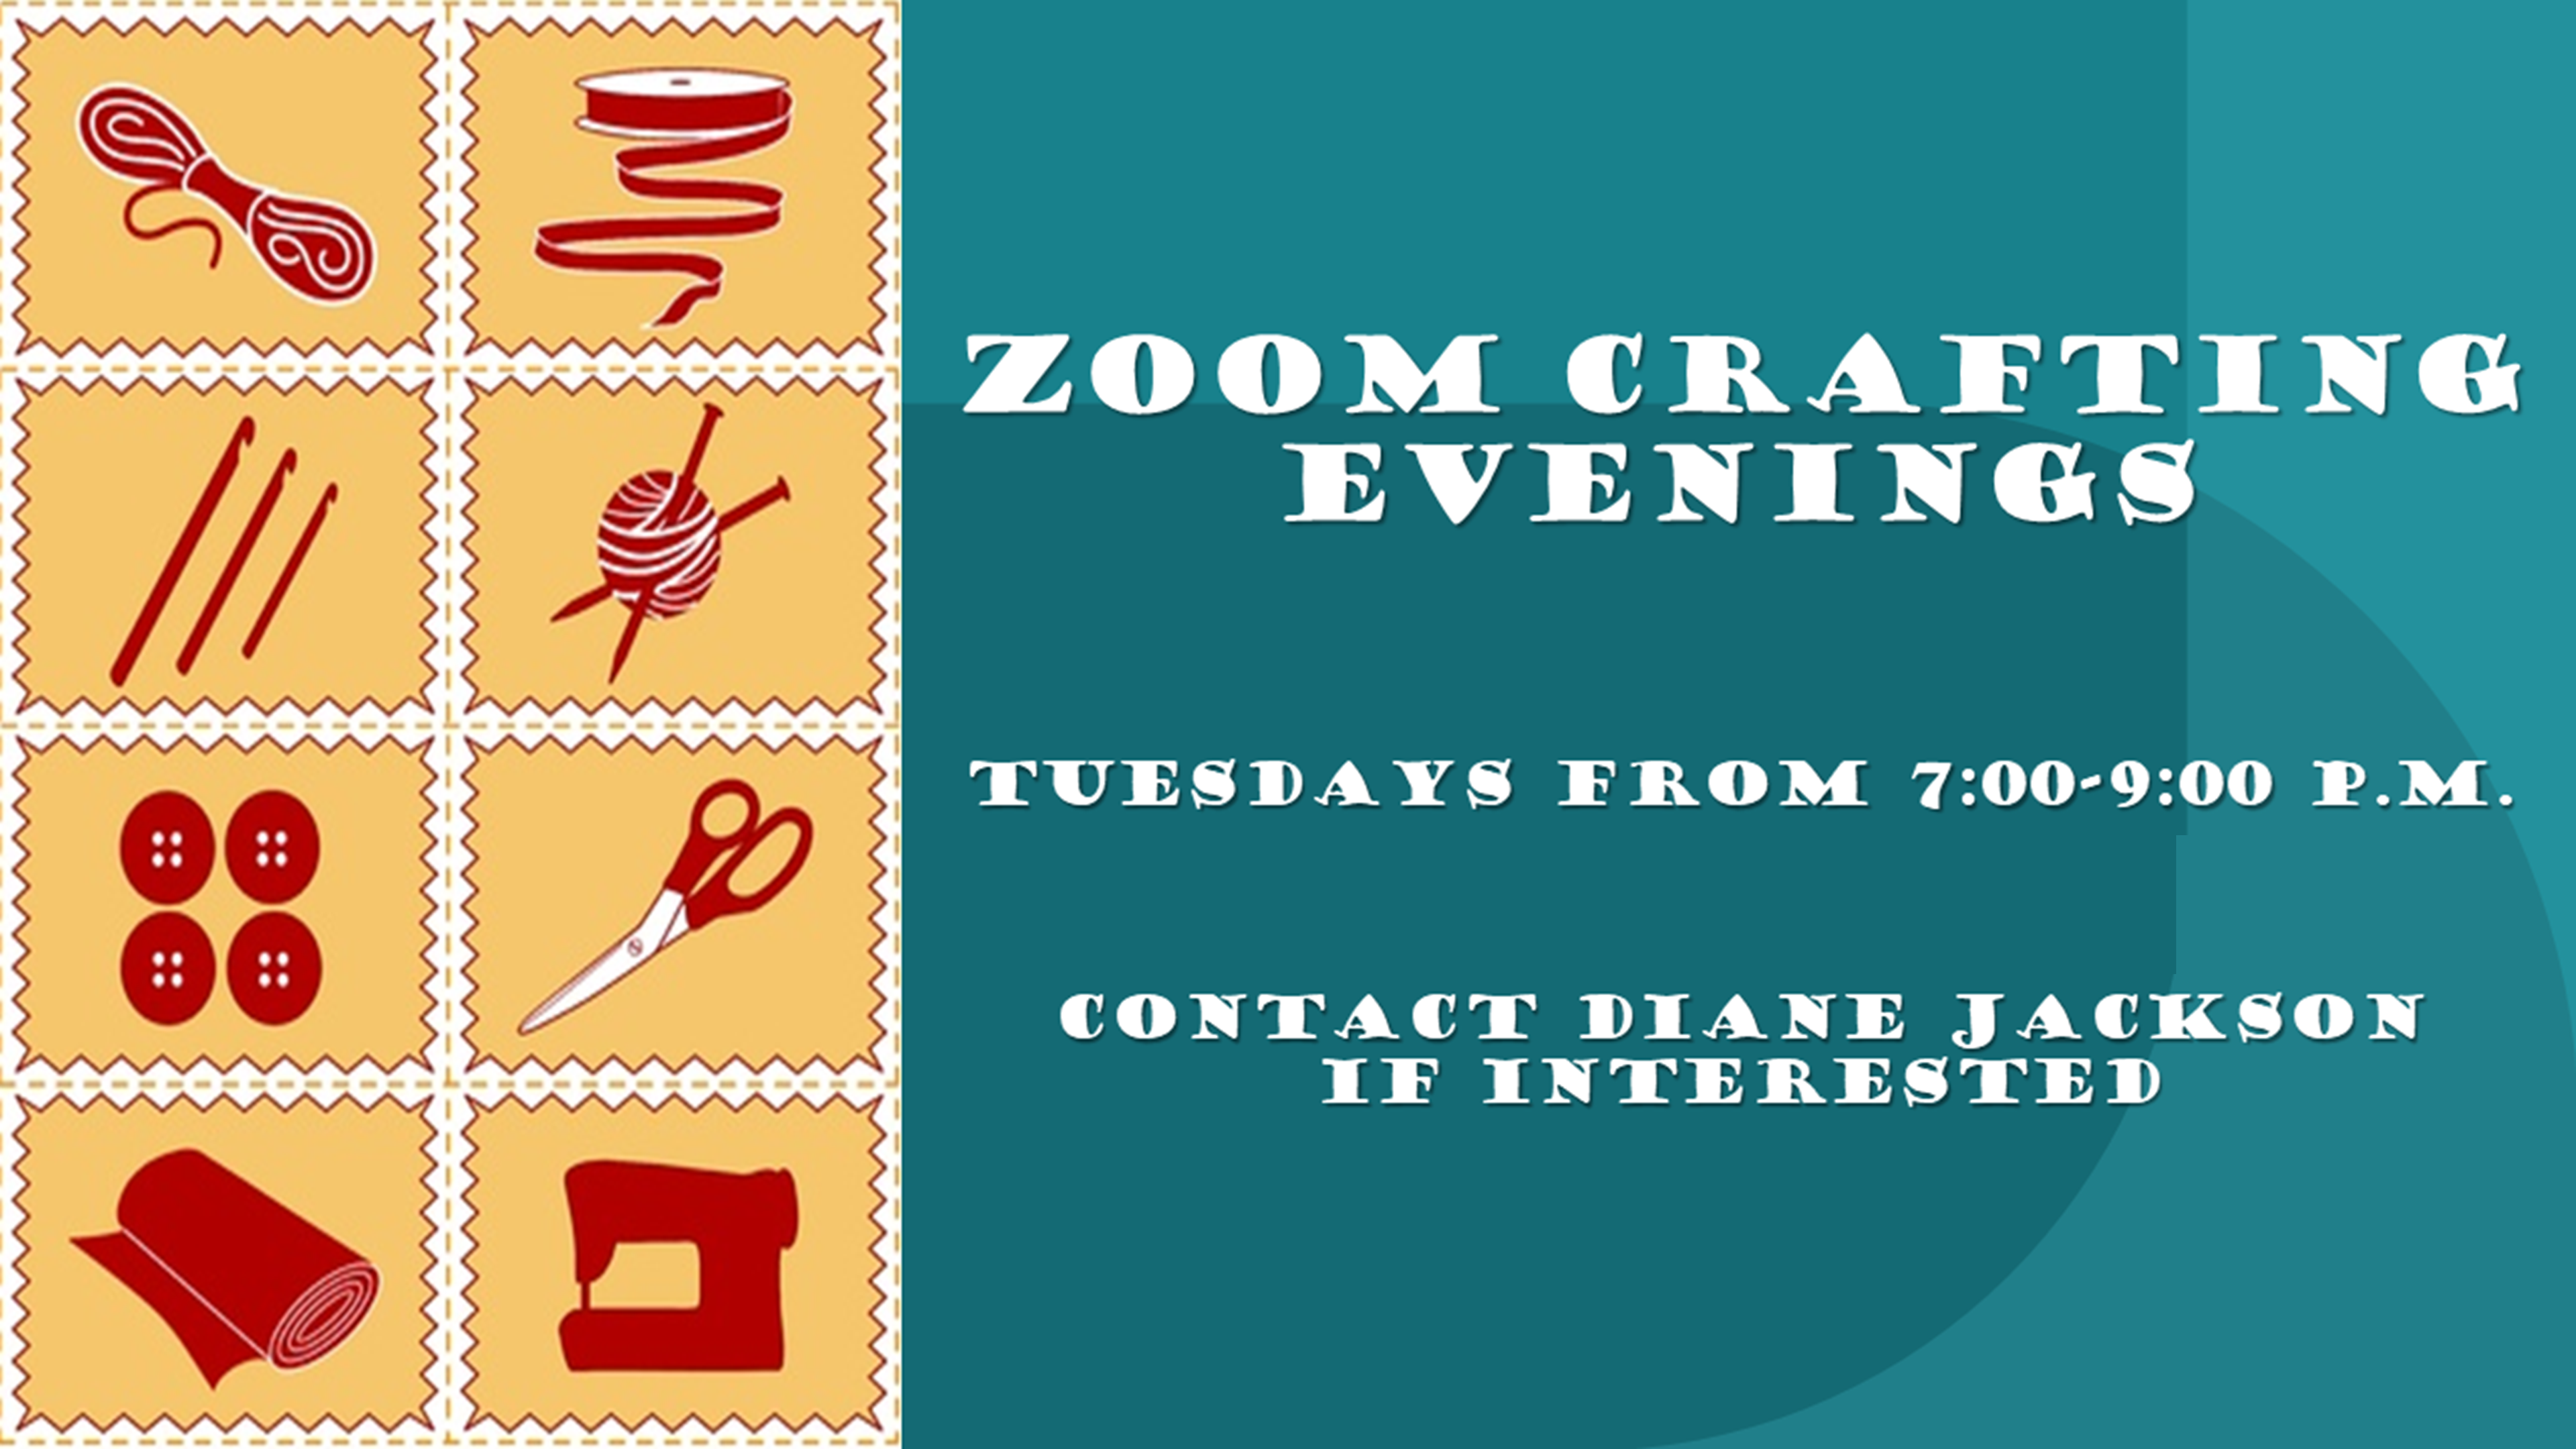 Zoom Crafting Evenings, Tuesdays from 7:00-9:00pm, contact Contact the office at fumcstillwater@gmail.com if interested.